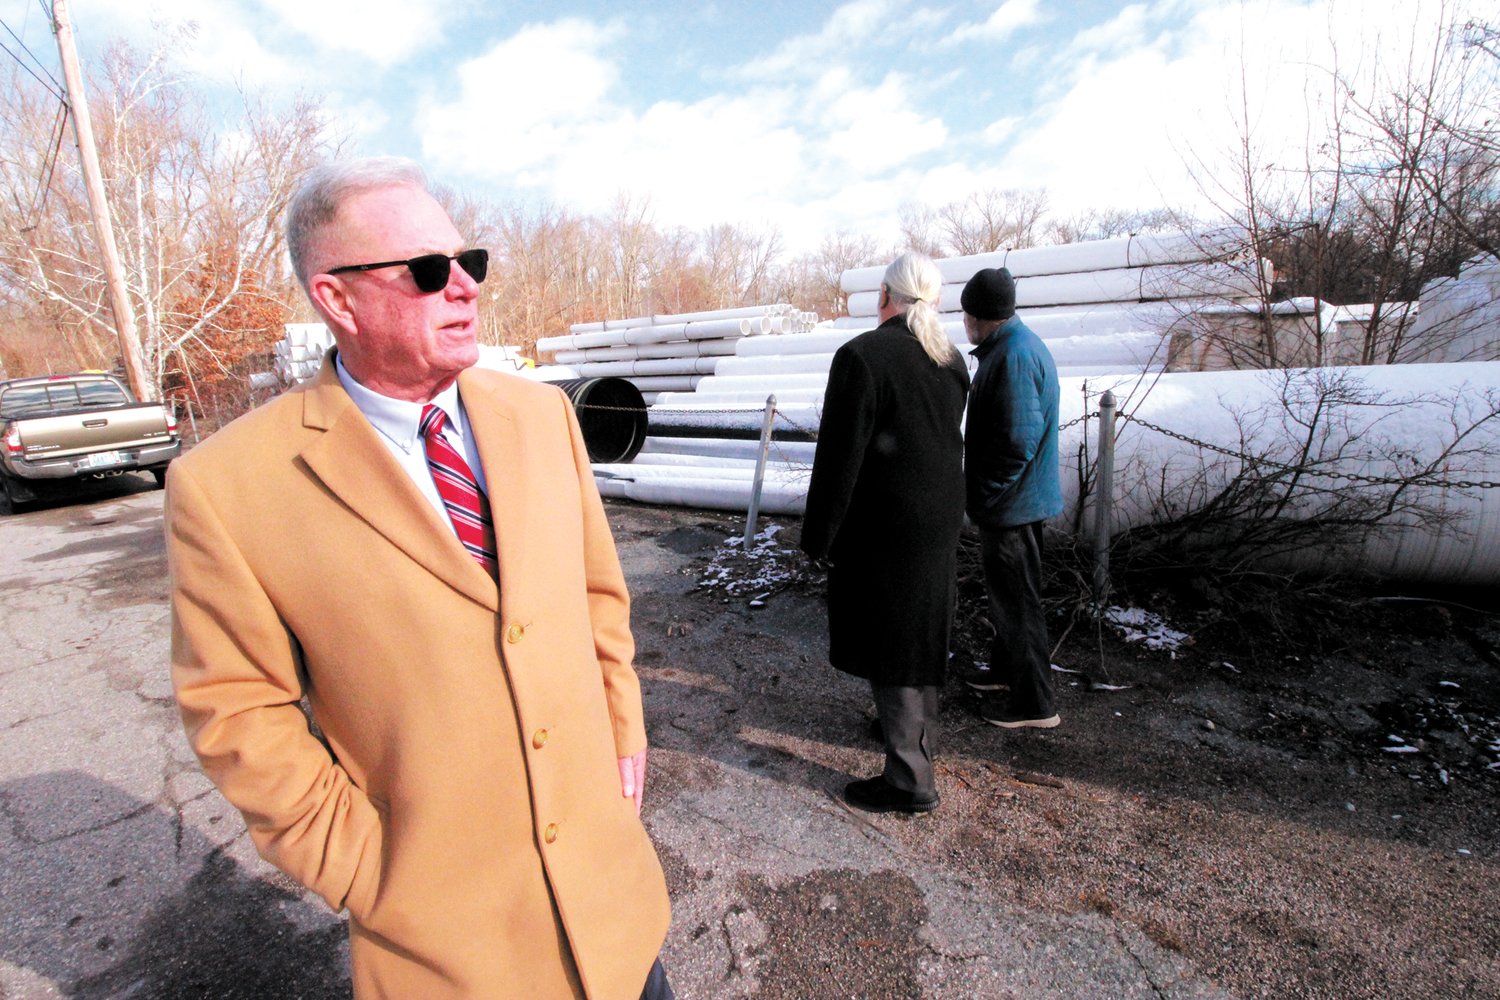 DRIVING LEGISLATIVE EFFORT: Rep. Joseph McNamara is the driving force behind a package of three bills aimed at ensuring access to the Pawtuxet River as well as notifying residents of toxic materials